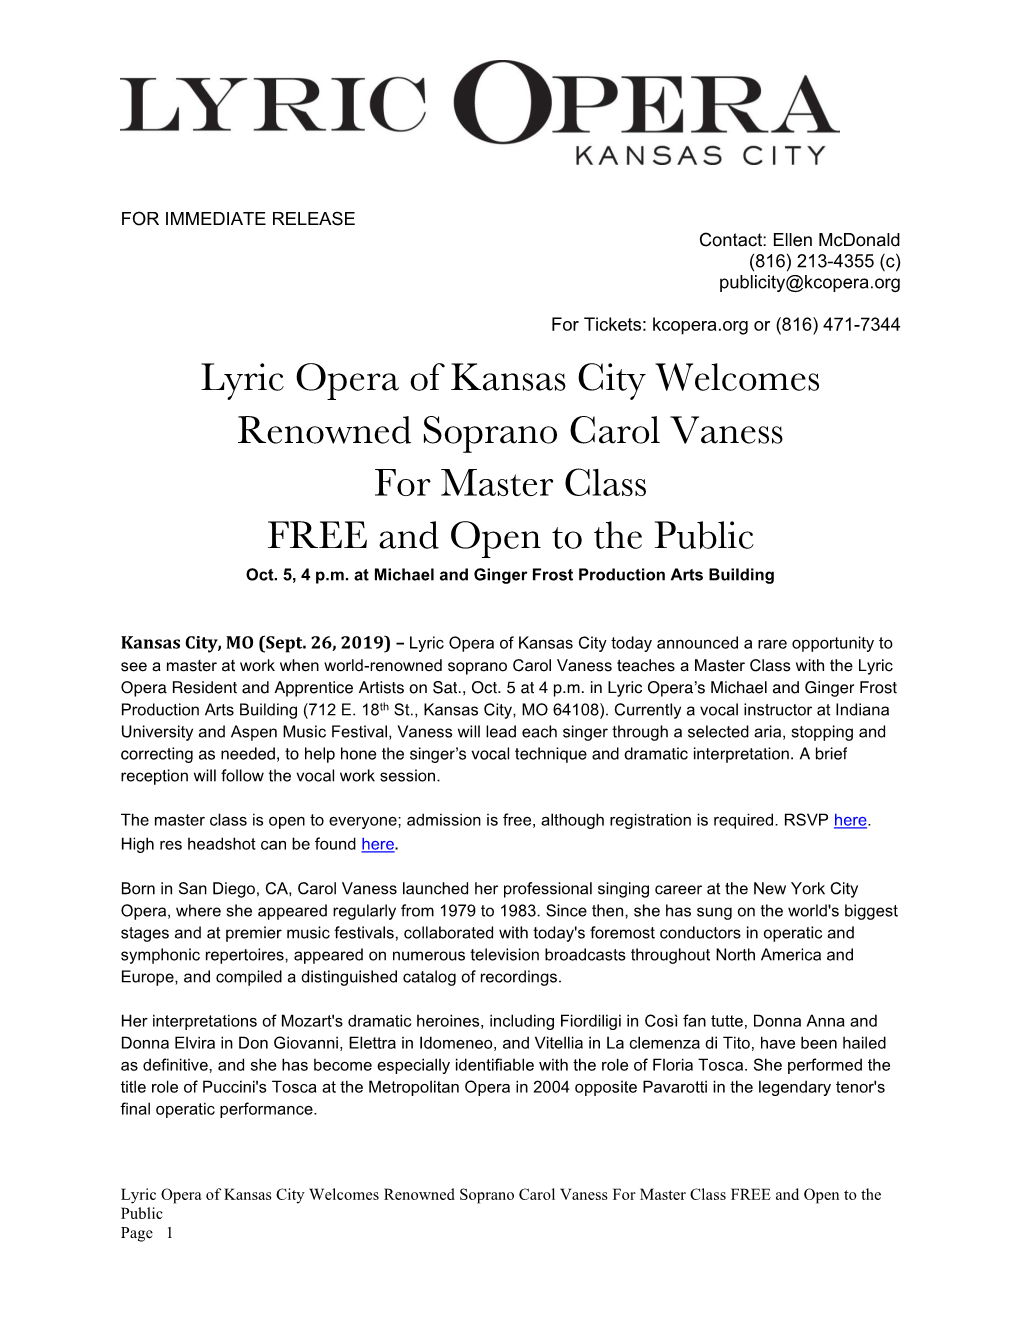 Lyric Opera of Kansas City Welcomes Renowned Soprano Carol Vaness for Master Class FREE and Open to the Public Oct